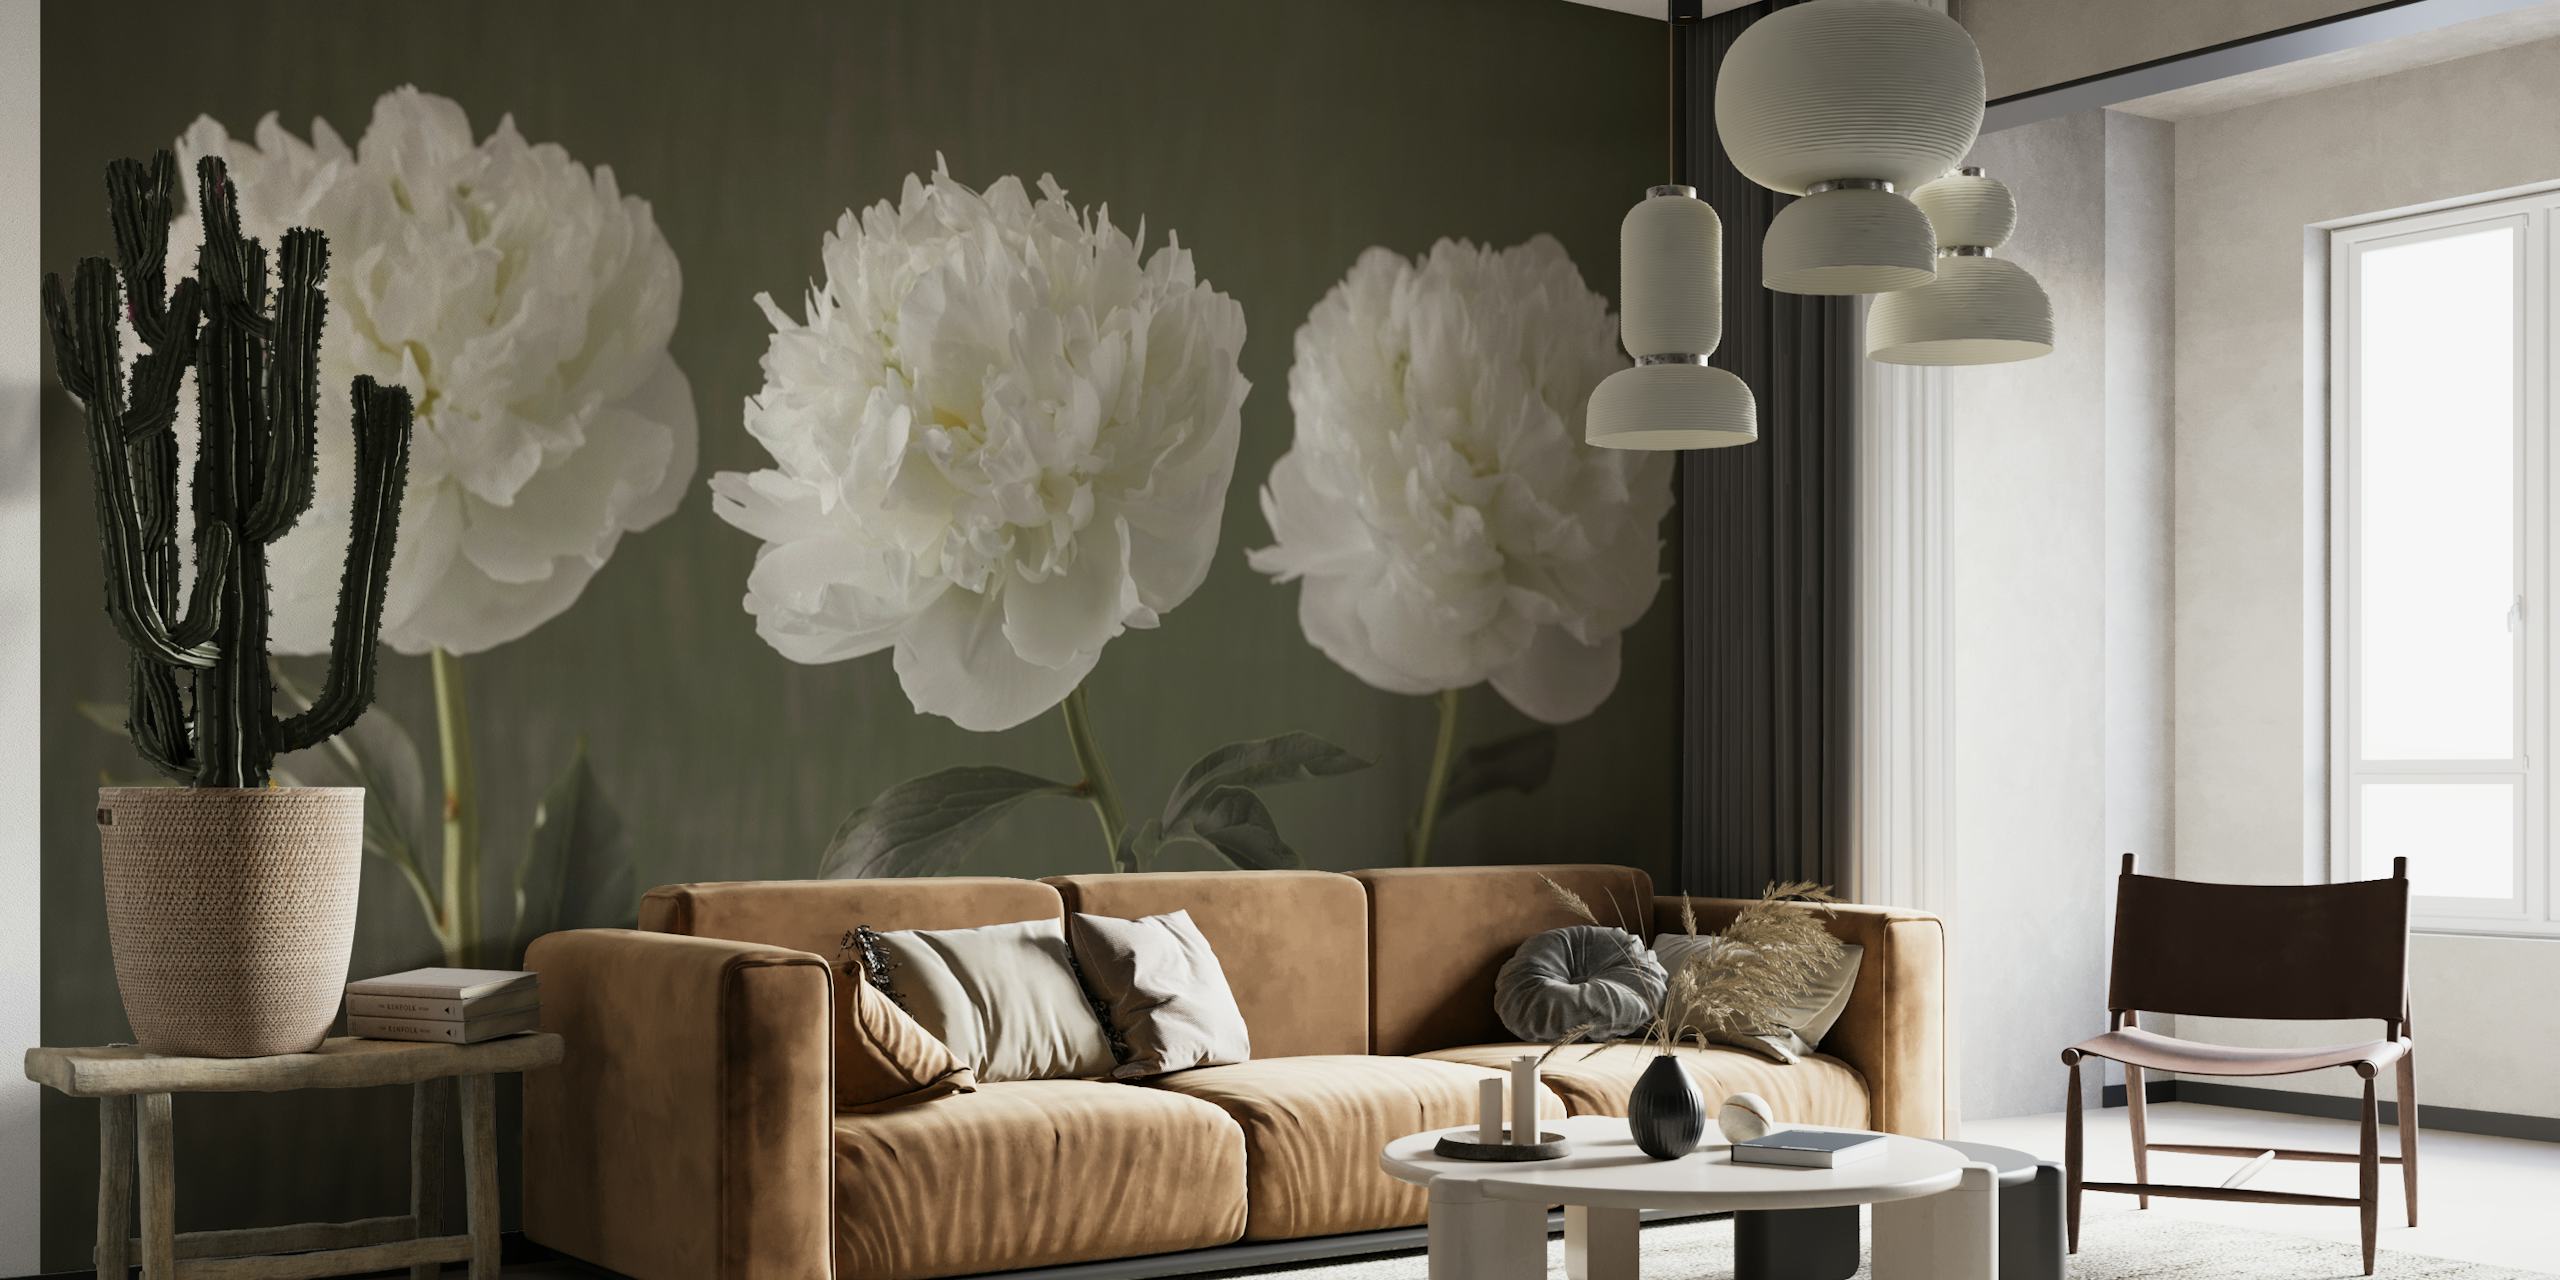 White peonies wall mural with a textured background for a peaceful ambiance